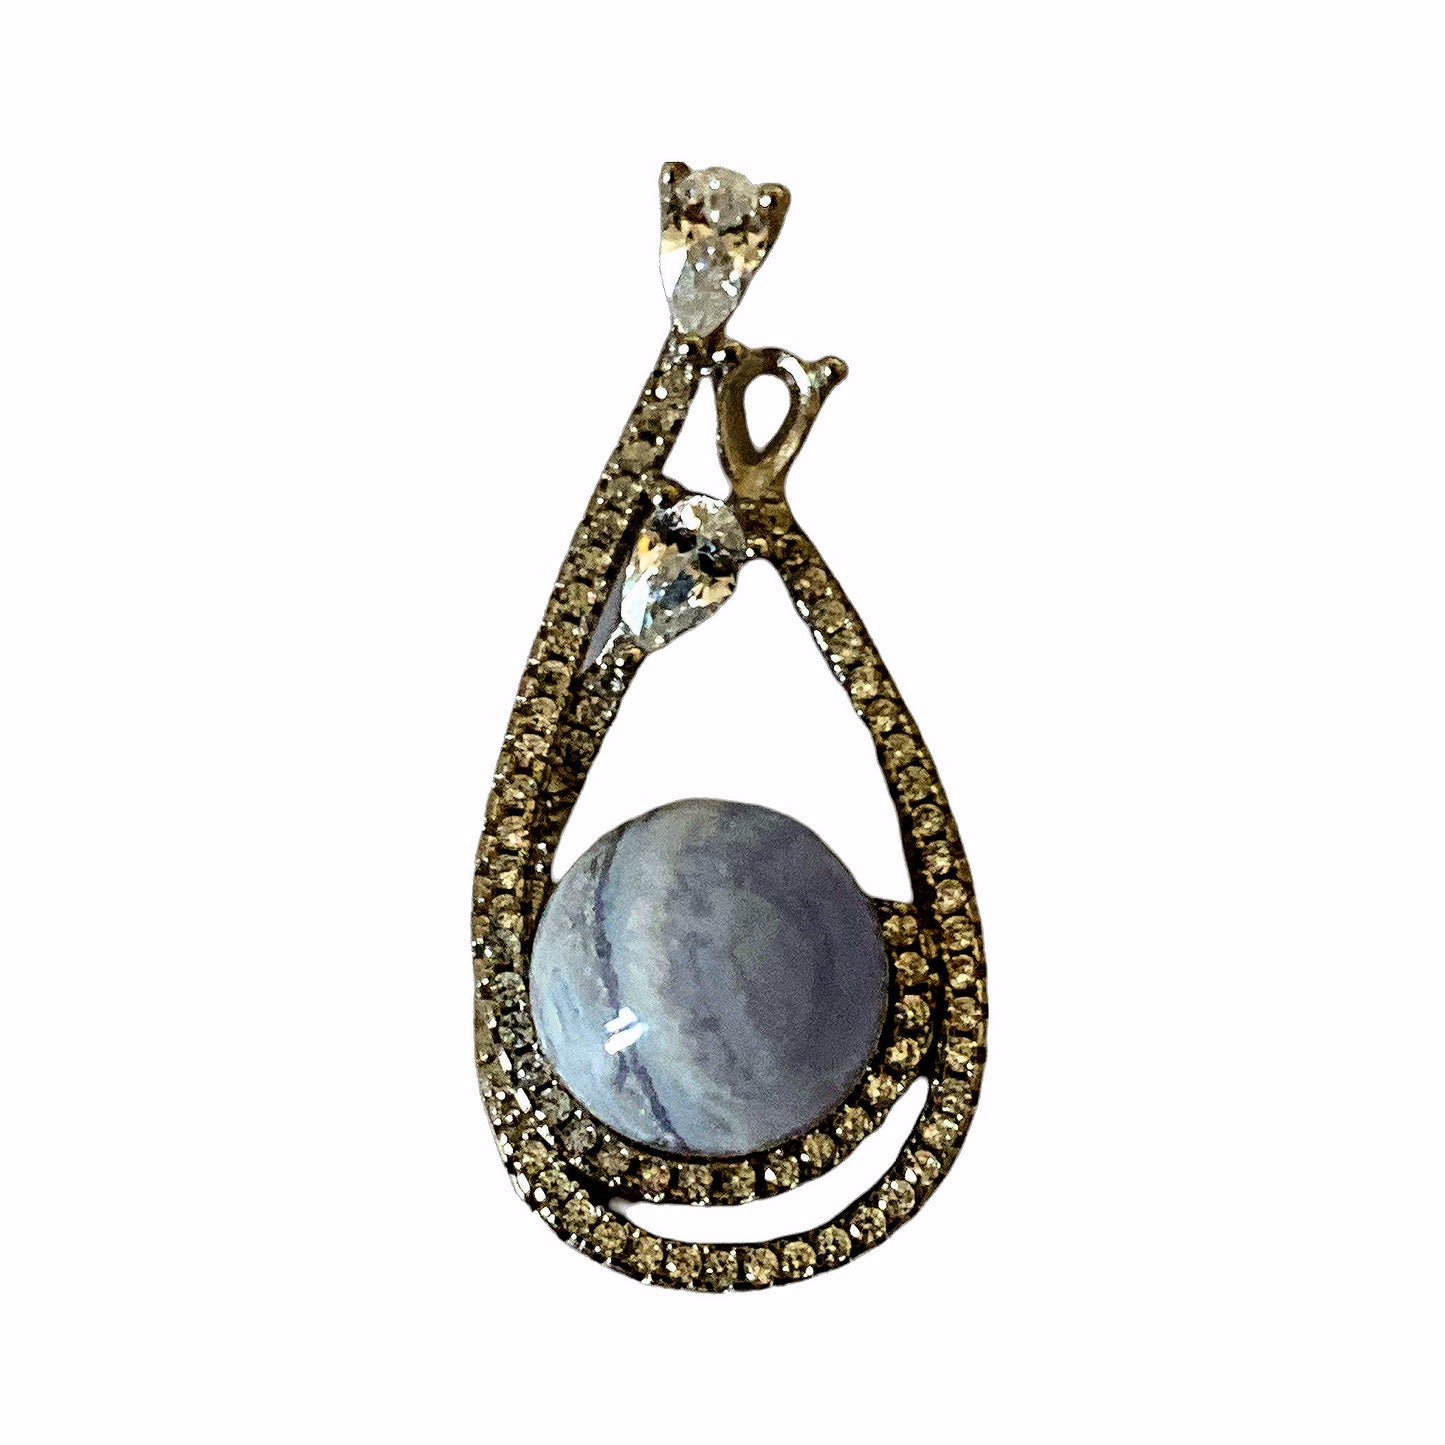 Blue Lace Sphere Tear Pendant with Rhinestones - Silver Color Plated Metal - 30x14mm - China - NEW922